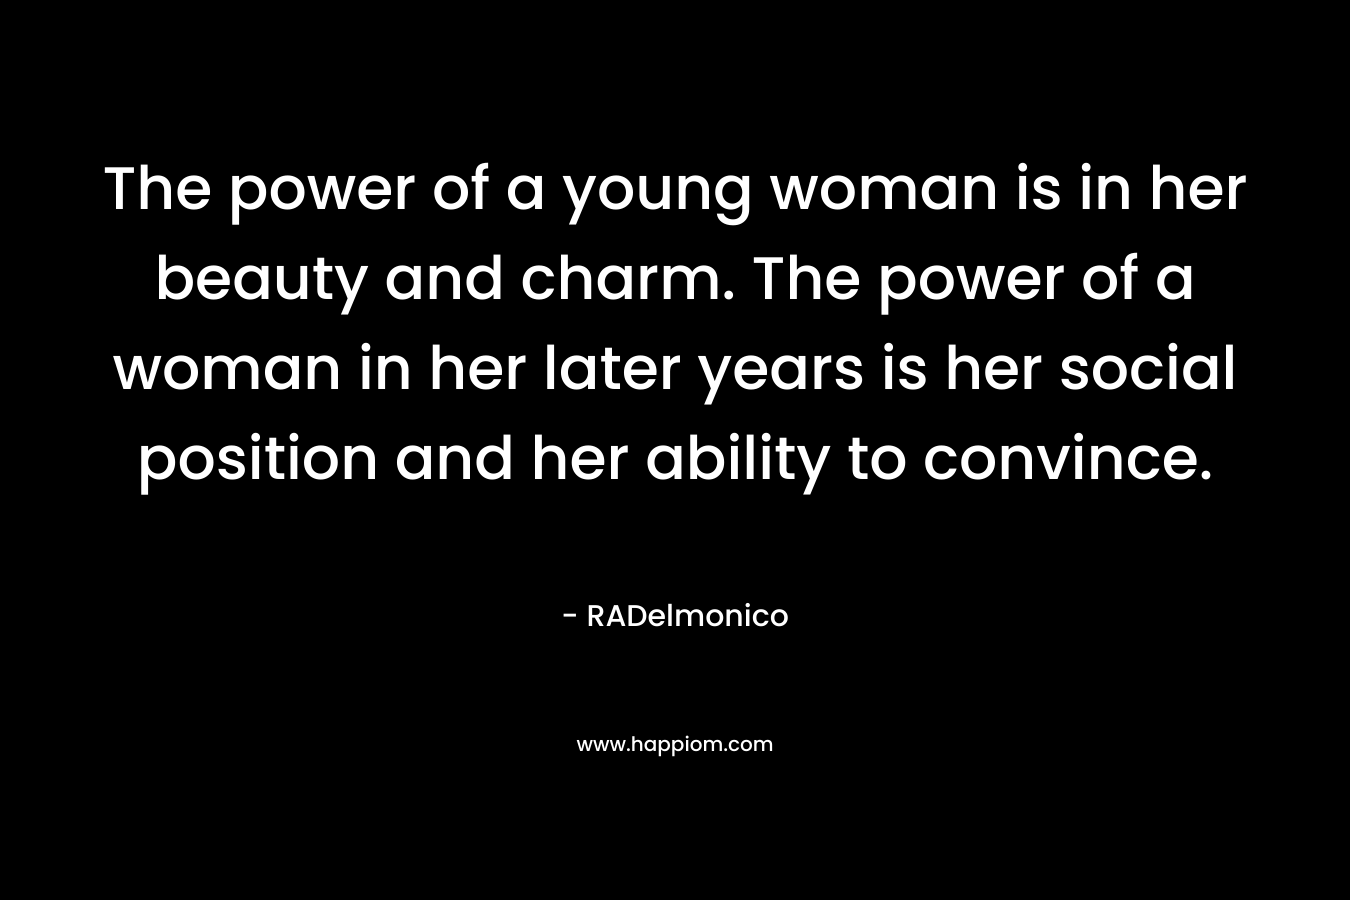 The power of a young woman is in her beauty and charm. The power of a woman in her later years is her social position and her ability to convince.